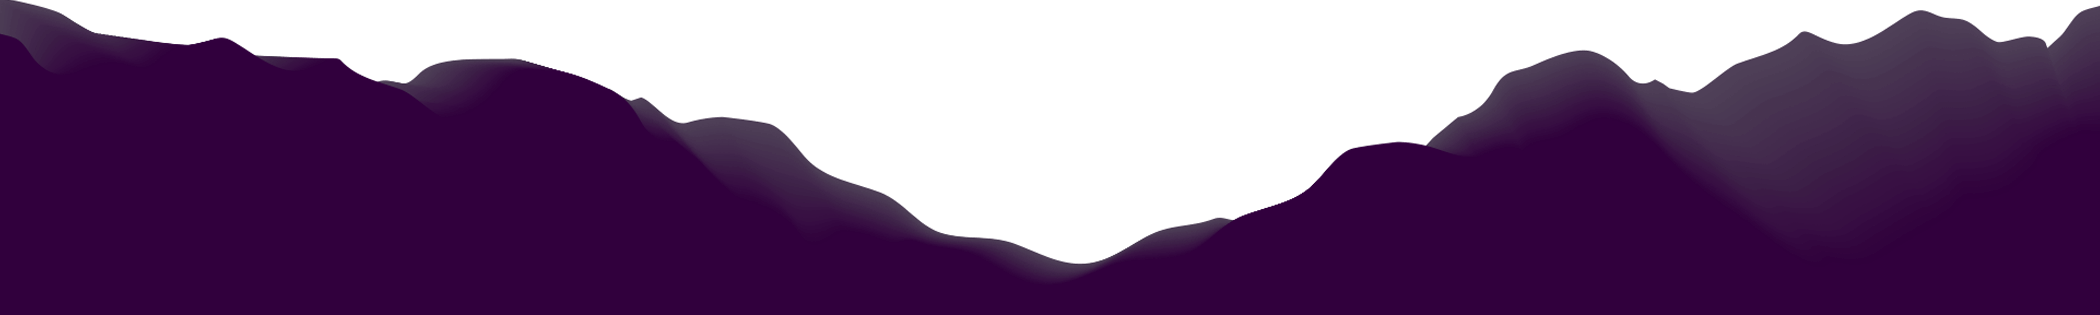 https://paranormal.ro/wp-content/uploads/2018/05/purple_light_top_divider.png